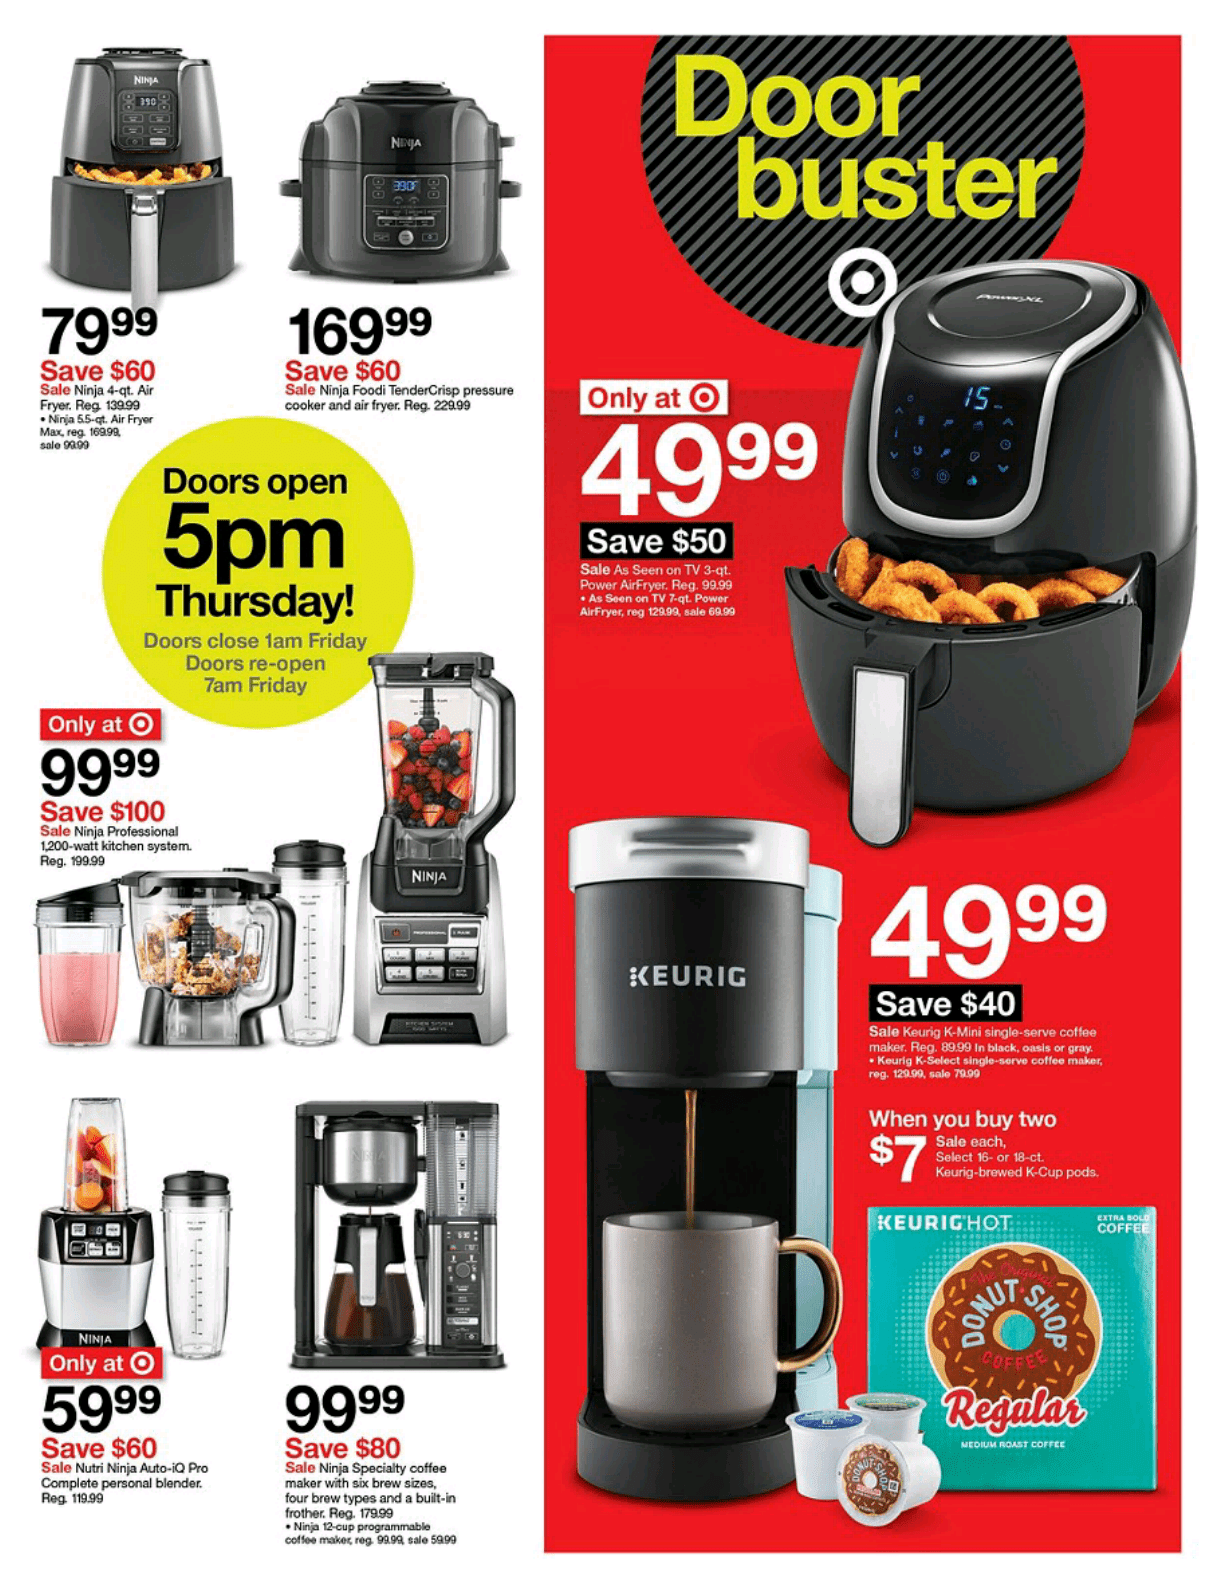 It’s Here! 2019 Target Black Friday Ad Preview - Page 13 of 13 - www.waldenwongart.com